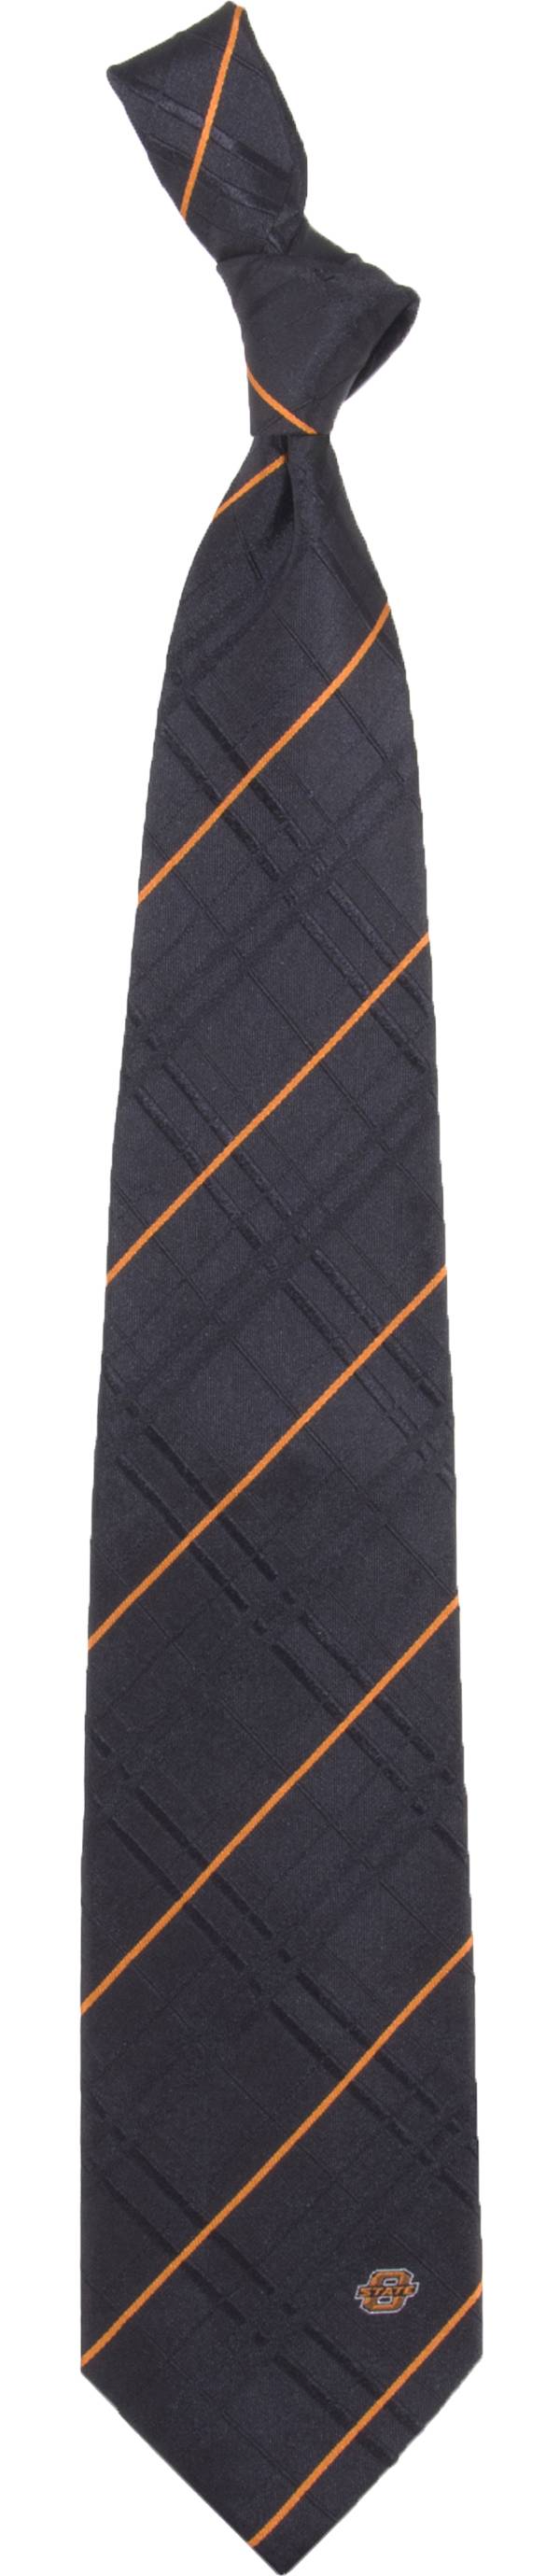 Eagles Wings Oklahoma State Cowboys Woven Oxford Necktie product image